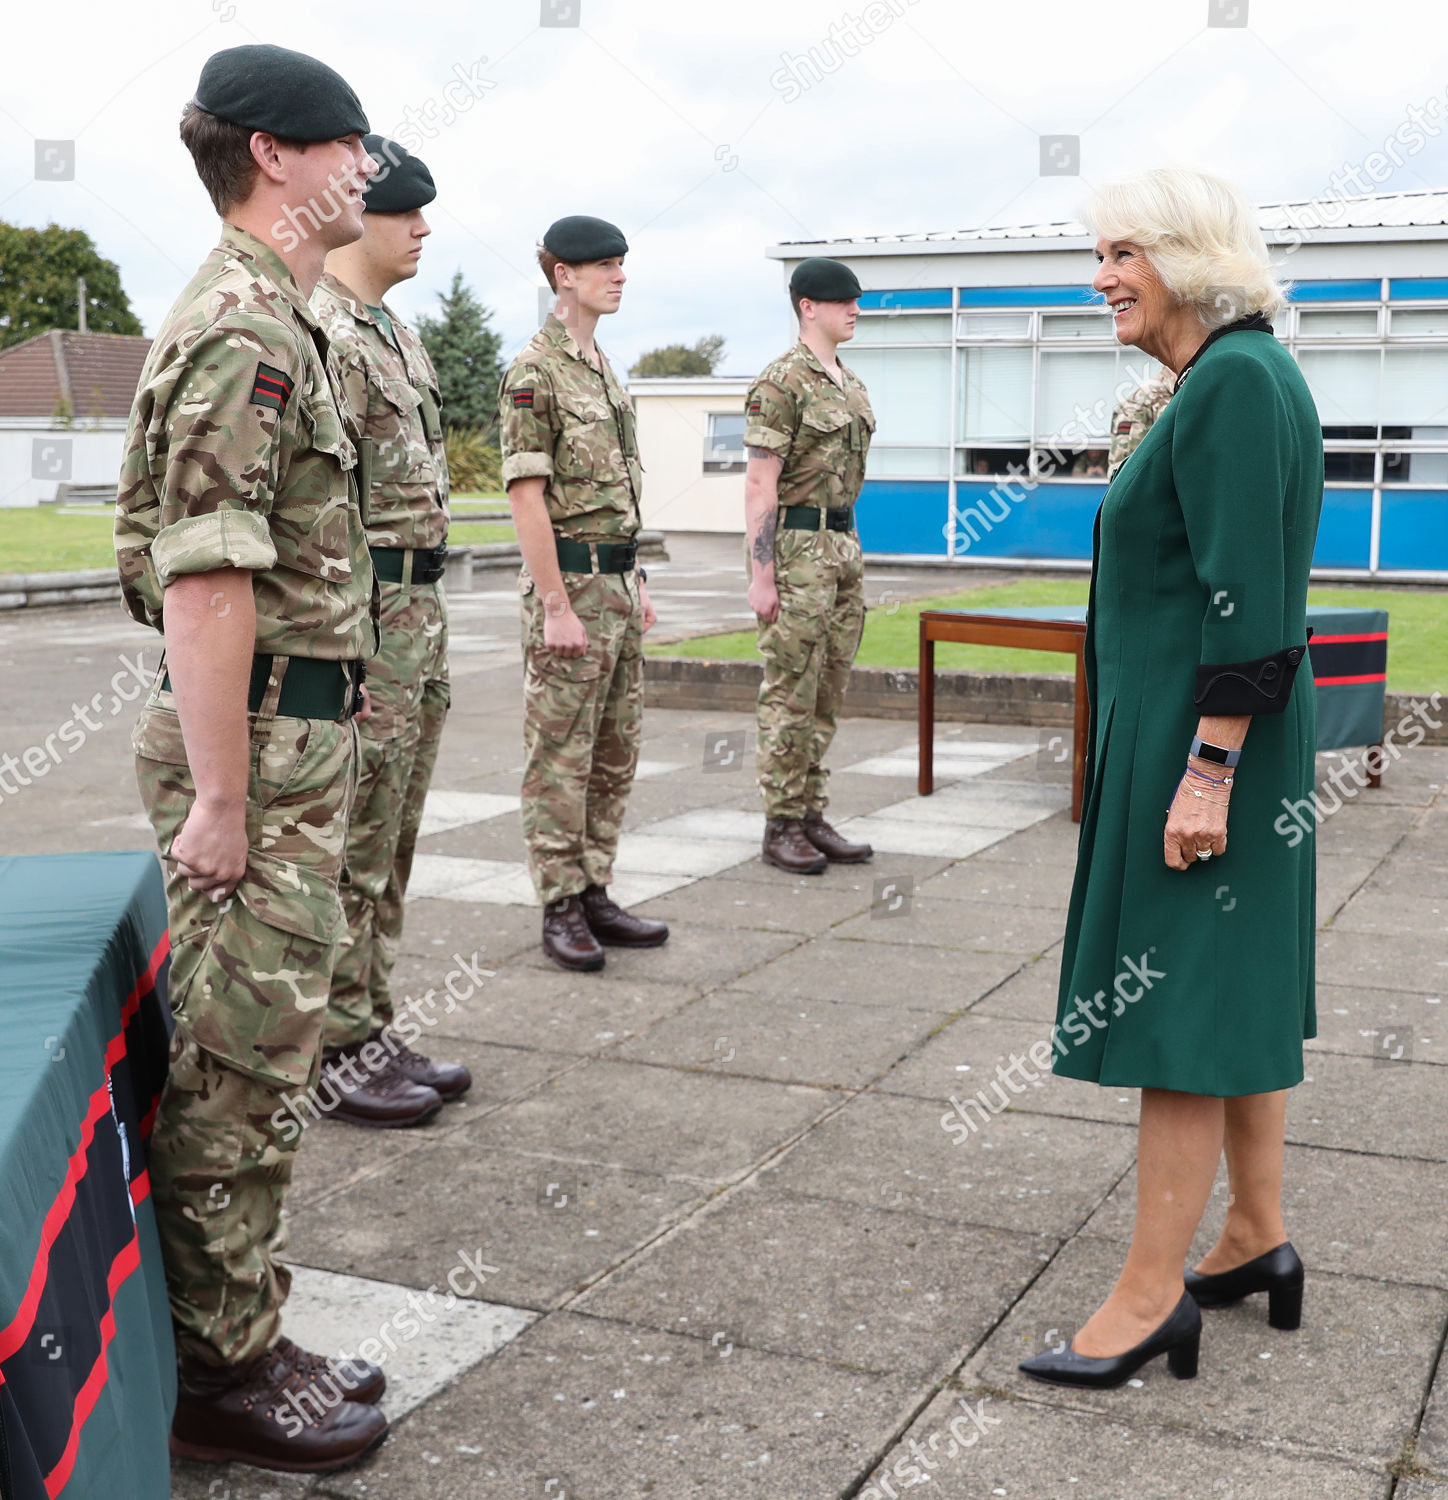 CASA REAL BRITÁNICA - Página 87 The-duchess-of-cornwall-visits-1st-battalion-the-rifles-beachley-barracks-chepstow-wales-shutterstock-editorial-10768638r